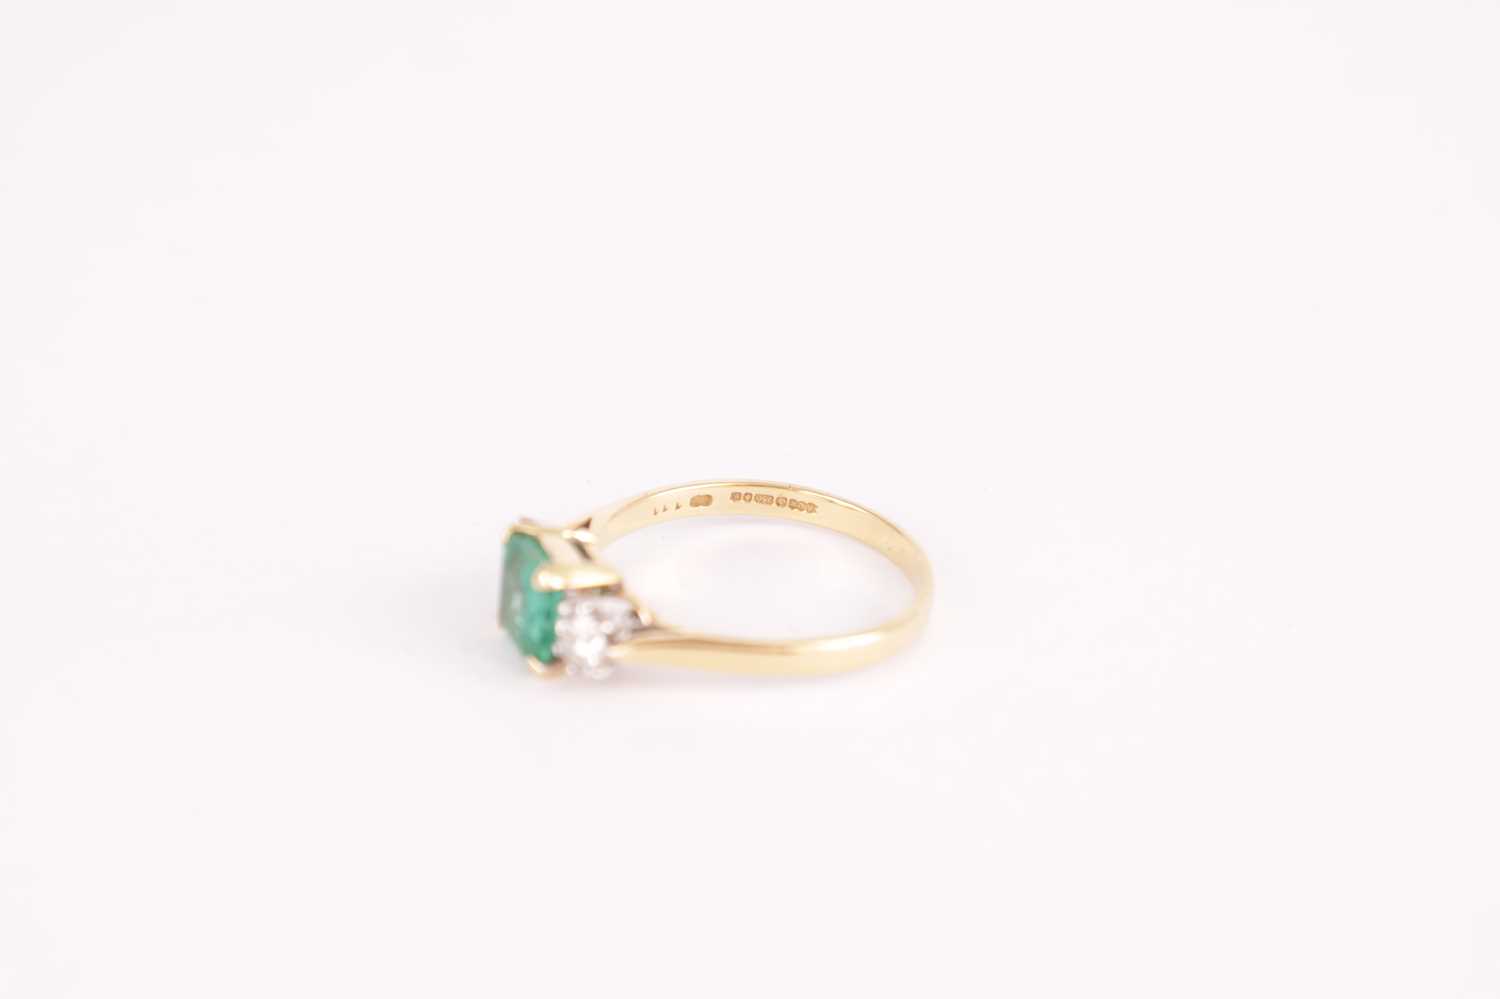 A LADIES 18CT GOLD THREE STONE EMERALD AND DIAMOND RING - Image 4 of 5